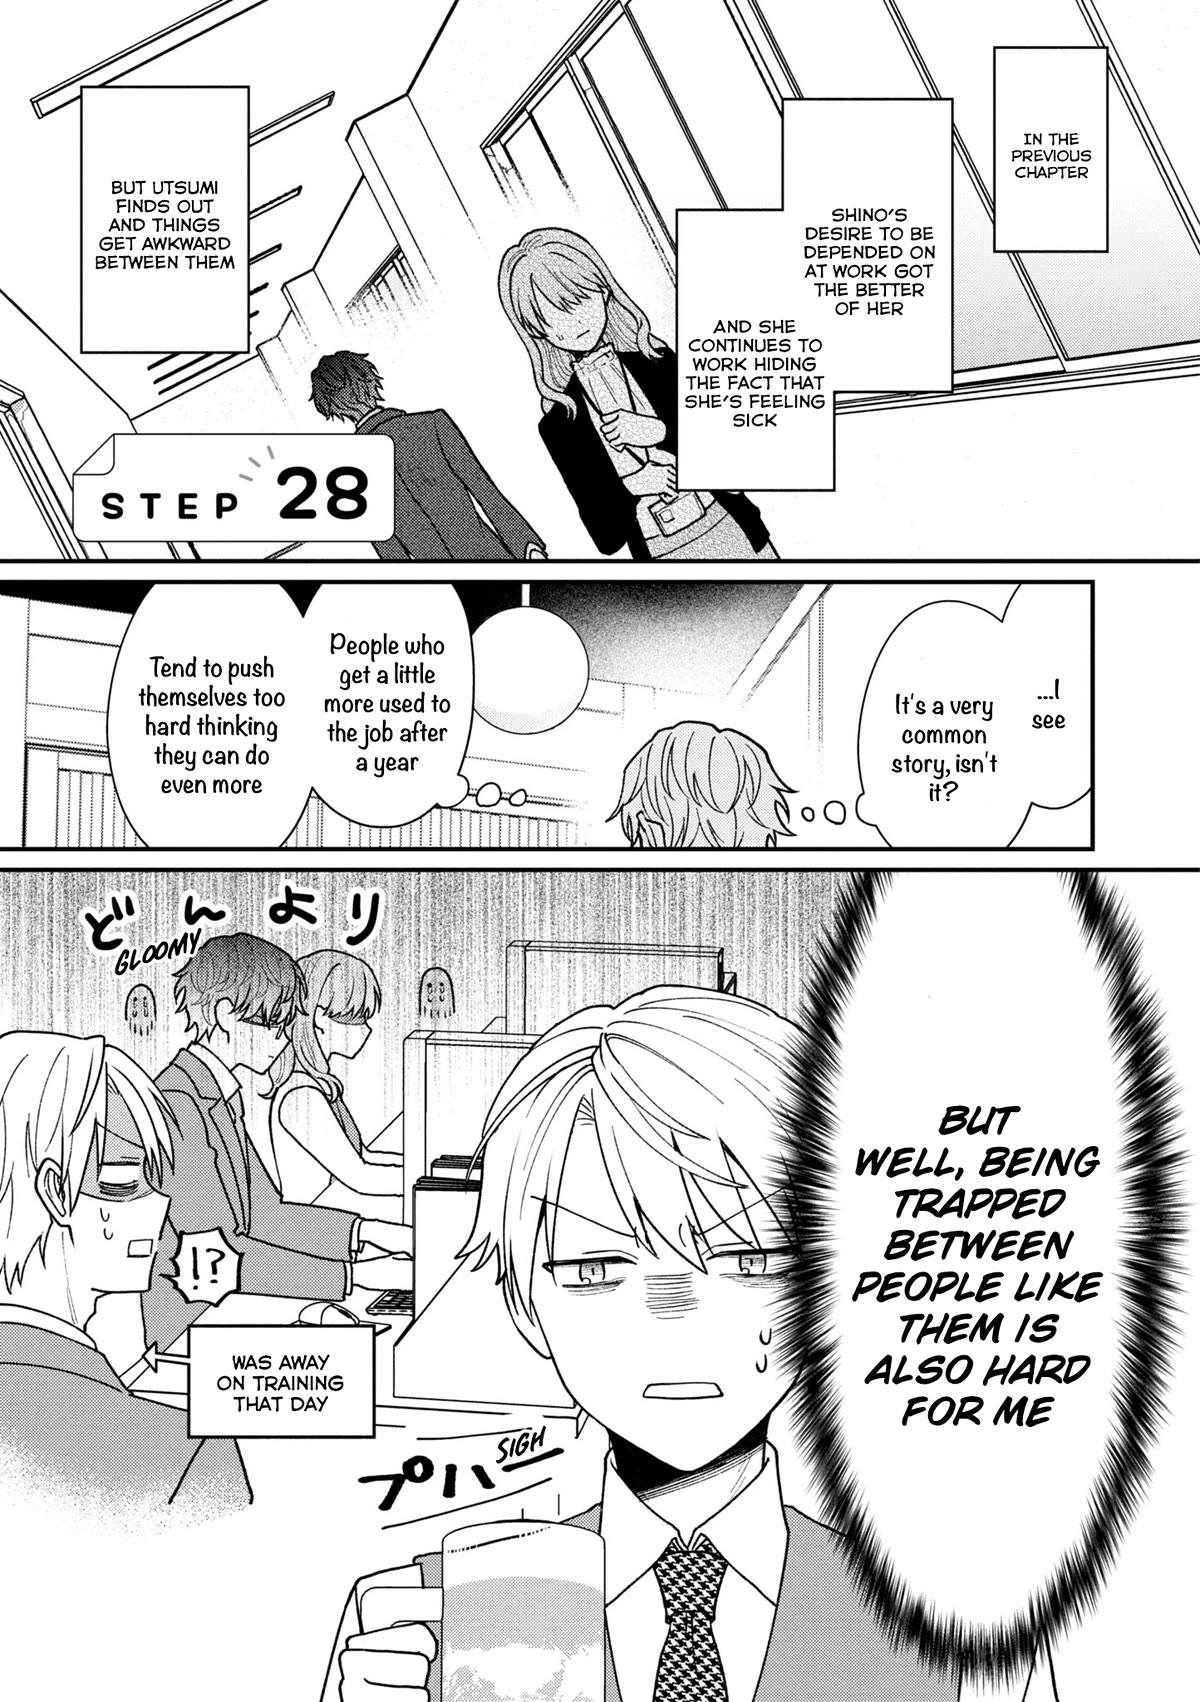 The New-Hire Who Could "Read" Emotions and the Unsociable Senpai - chapter 28 - #2